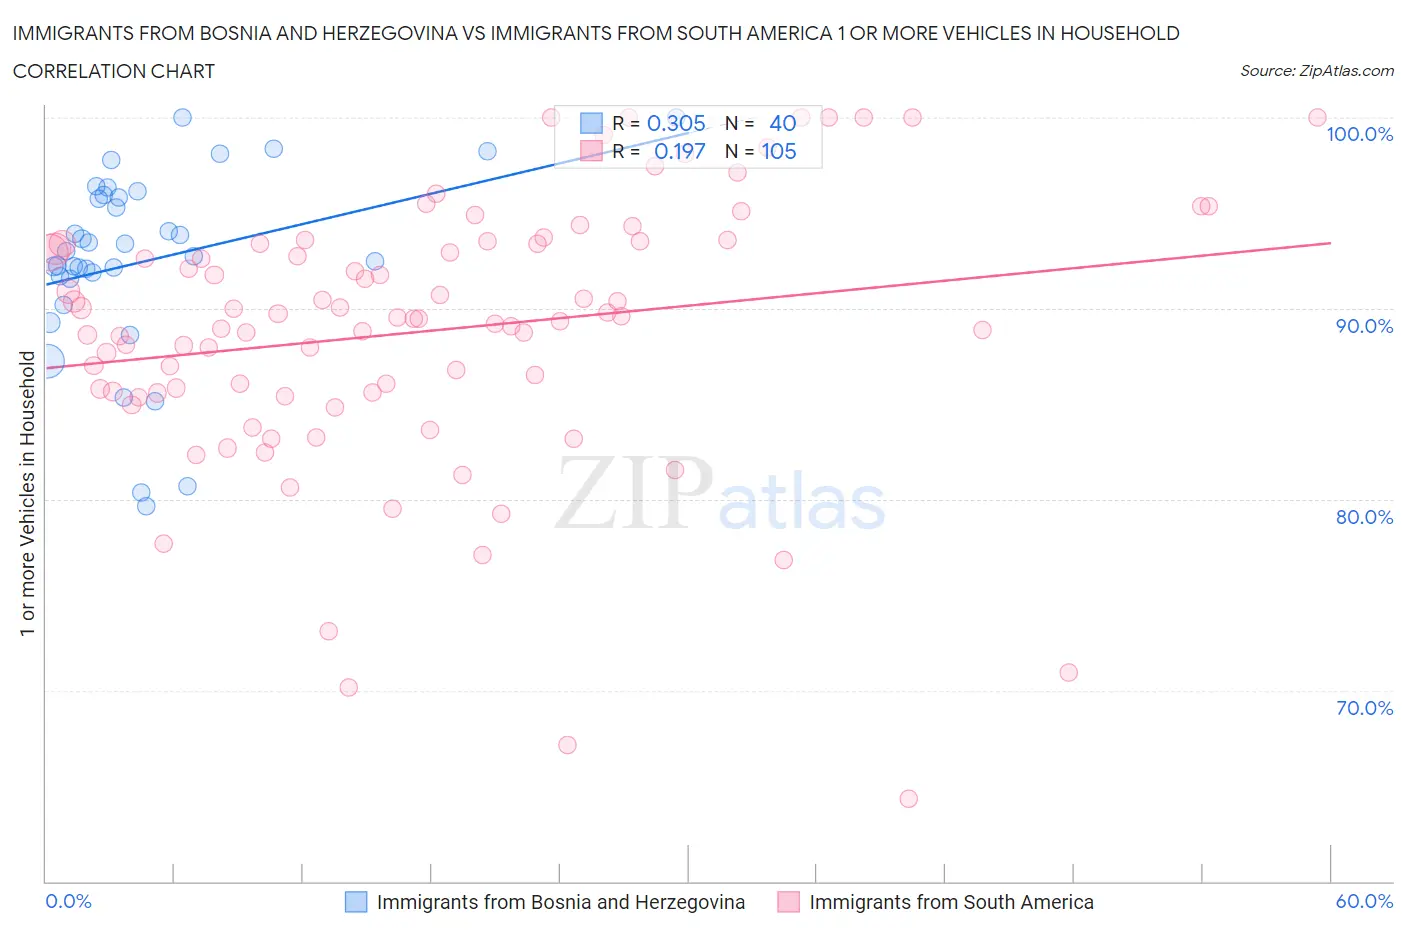 Immigrants from Bosnia and Herzegovina vs Immigrants from South America 1 or more Vehicles in Household